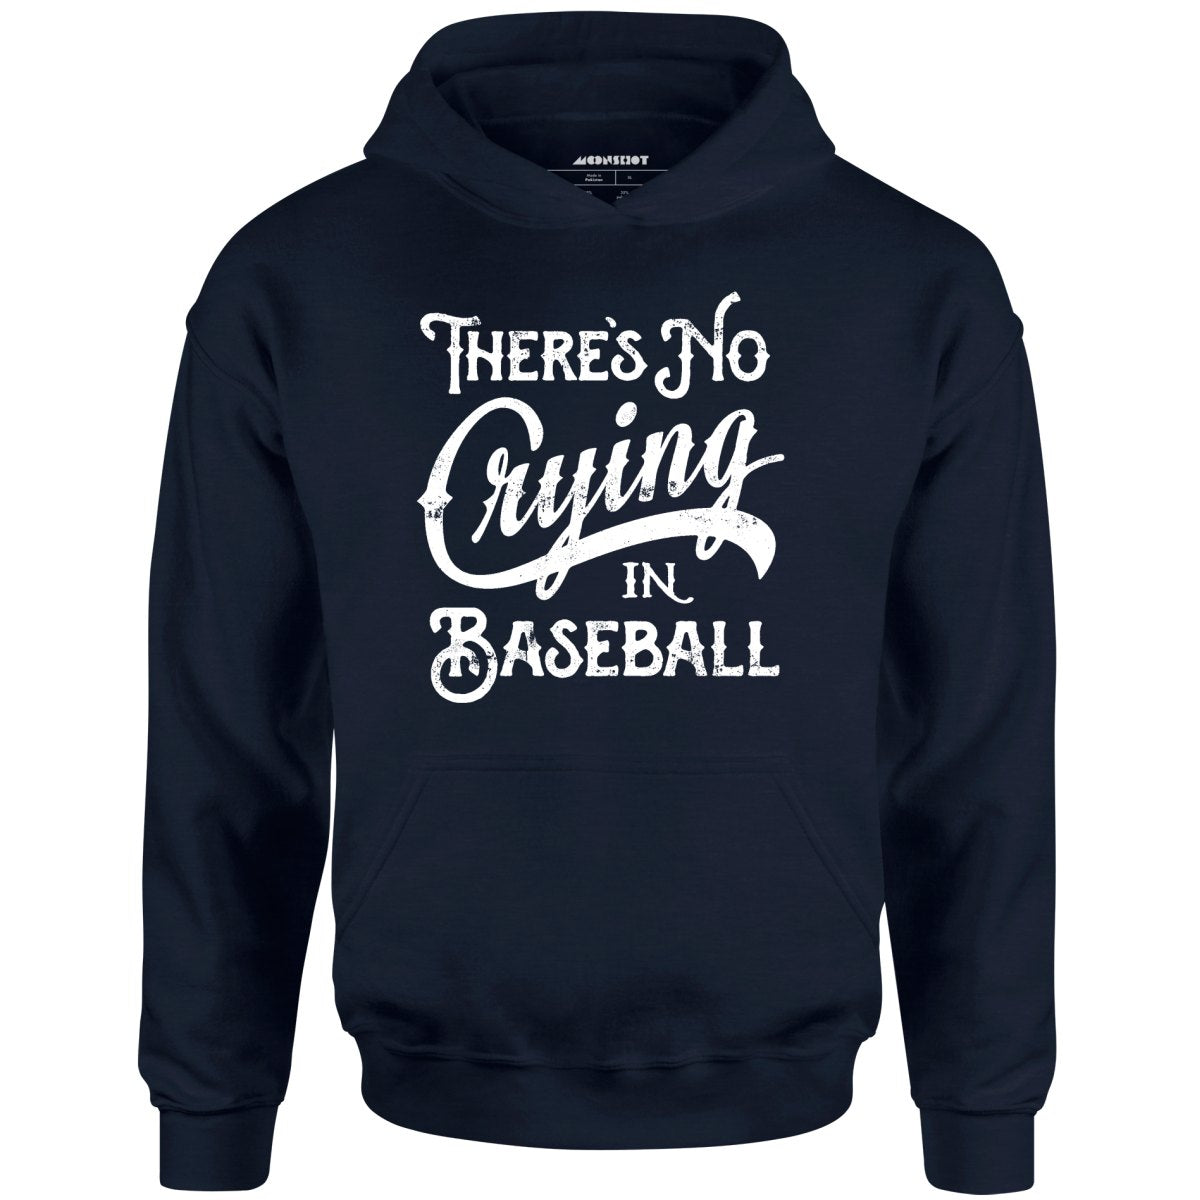 There's No Crying in Baseball - Unisex Hoodie